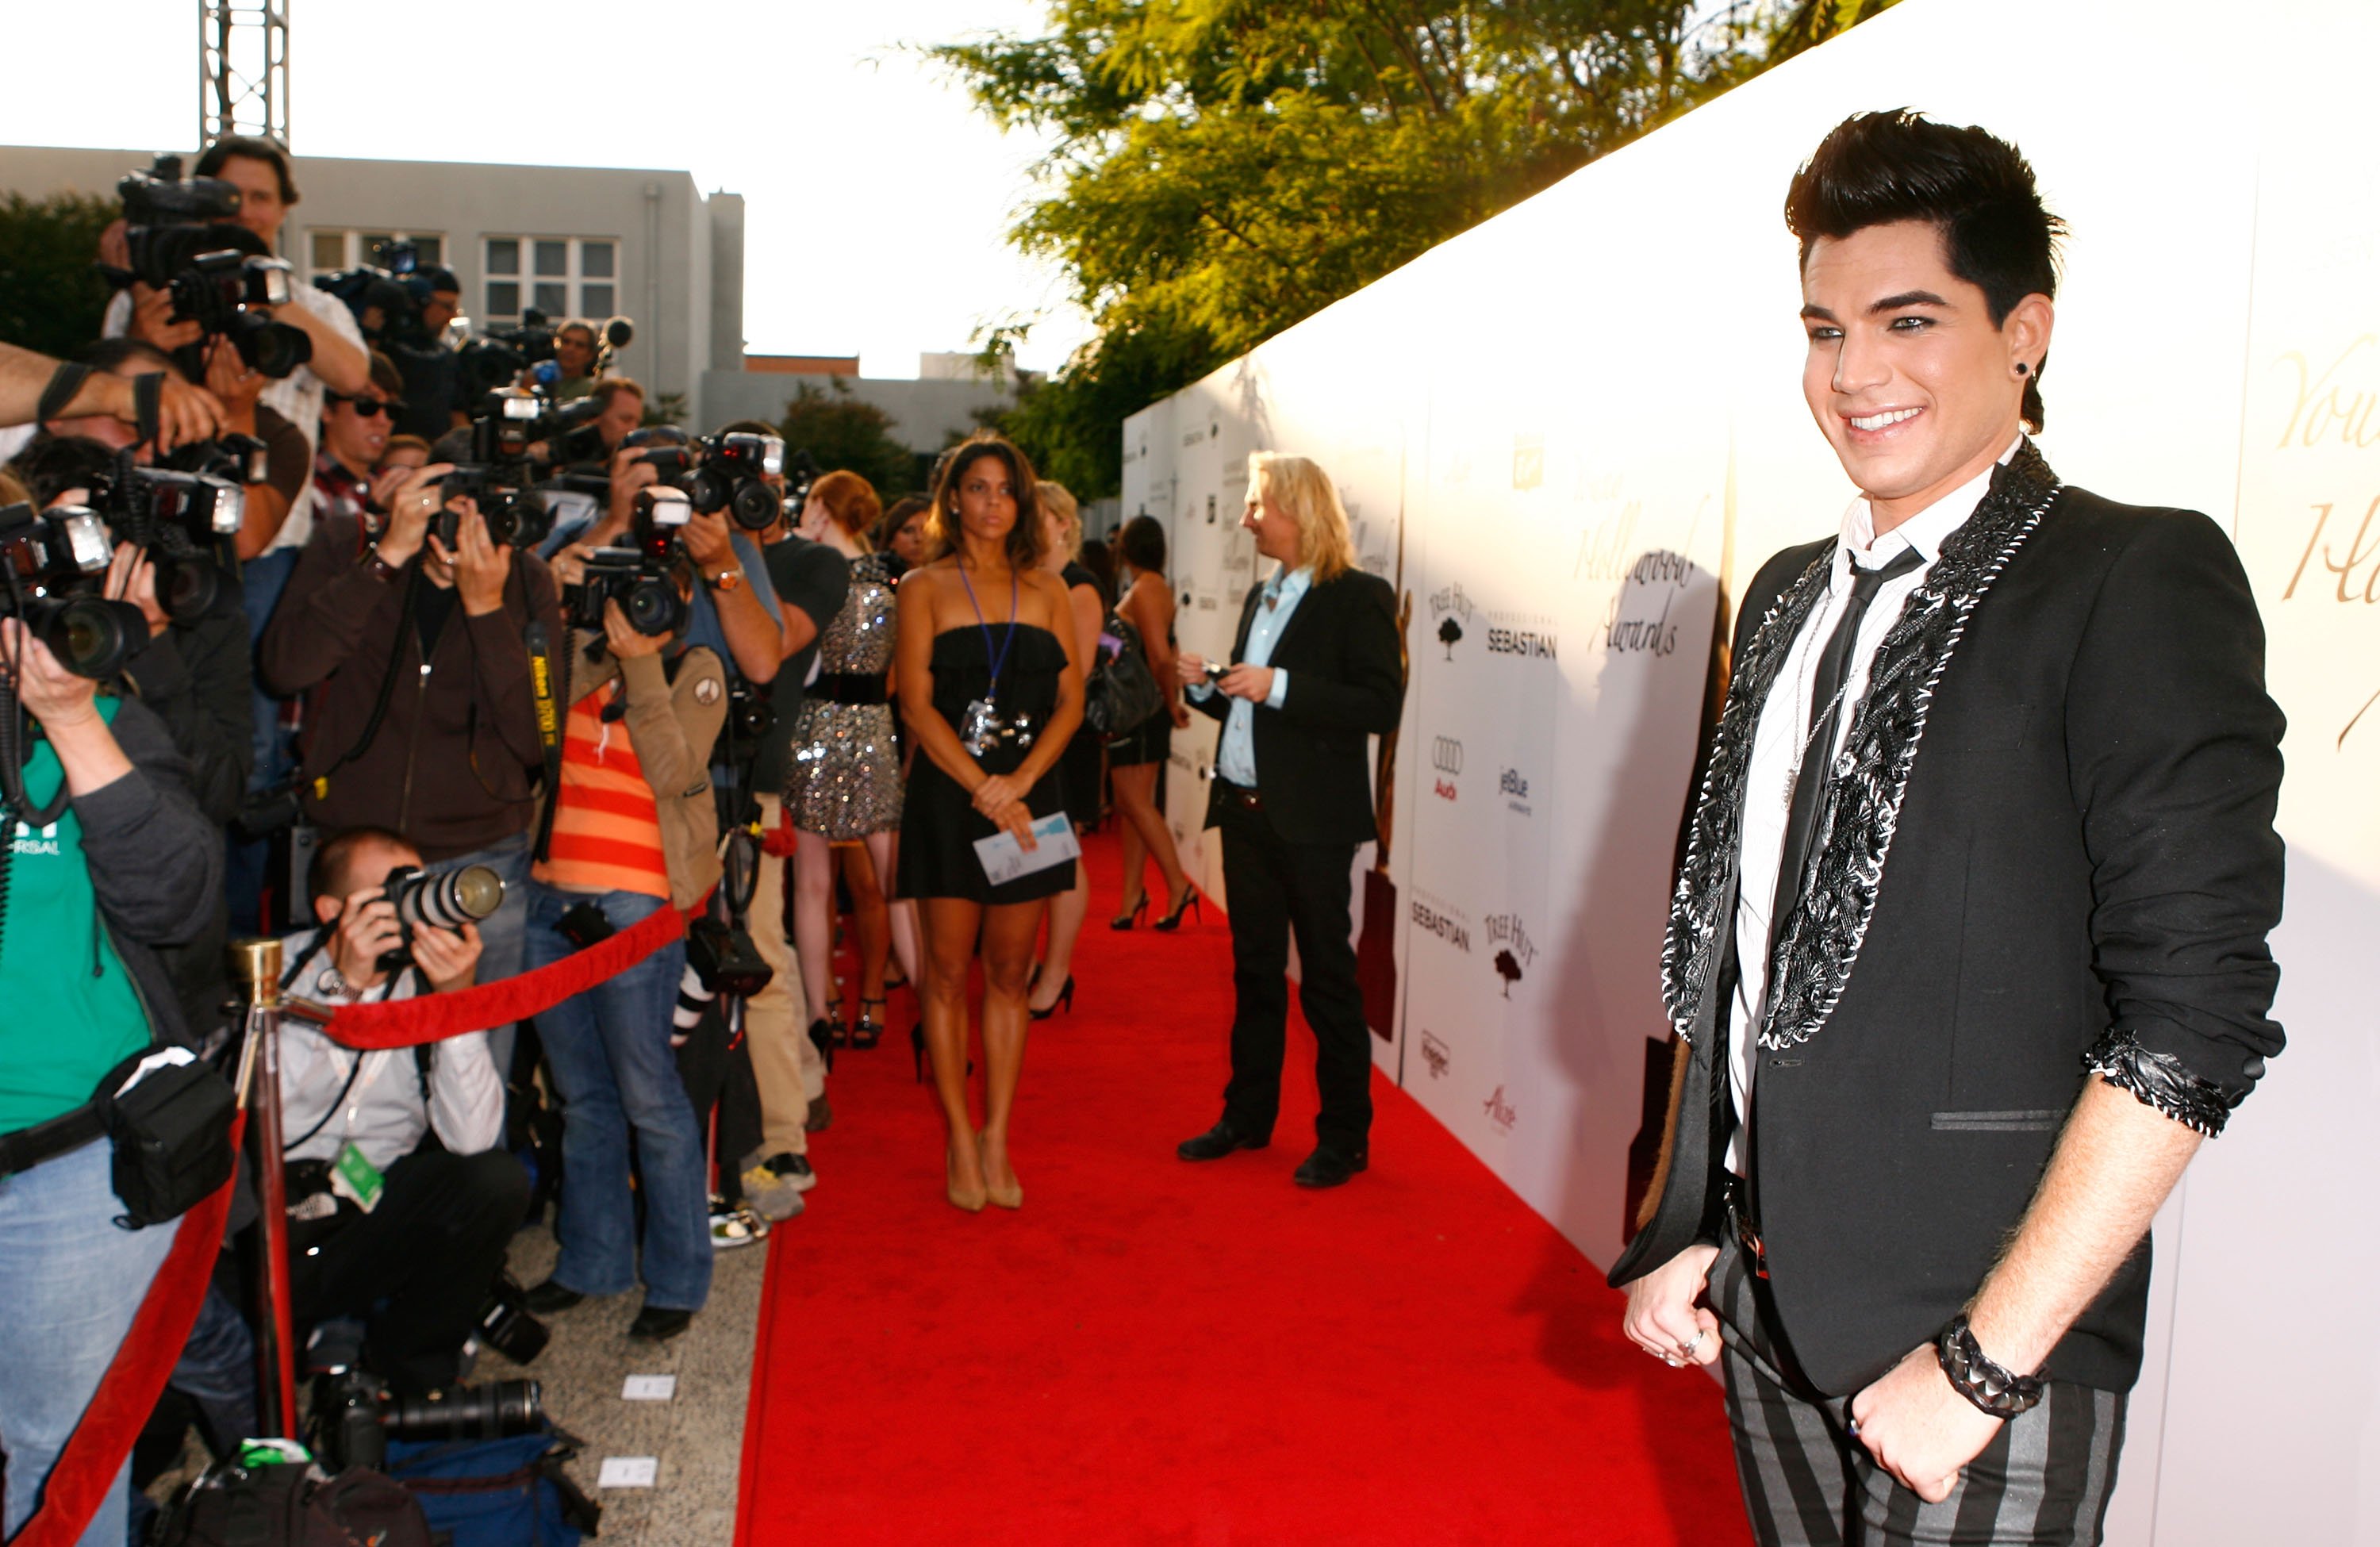 Singer Adam Lambert arrives at Hollywood Life's 11th Annual Young Hollywood Awards held at The Eli and Edythe Broad Stage on June 7, 2009 in Santa Monica, California. | Source: Getty Images